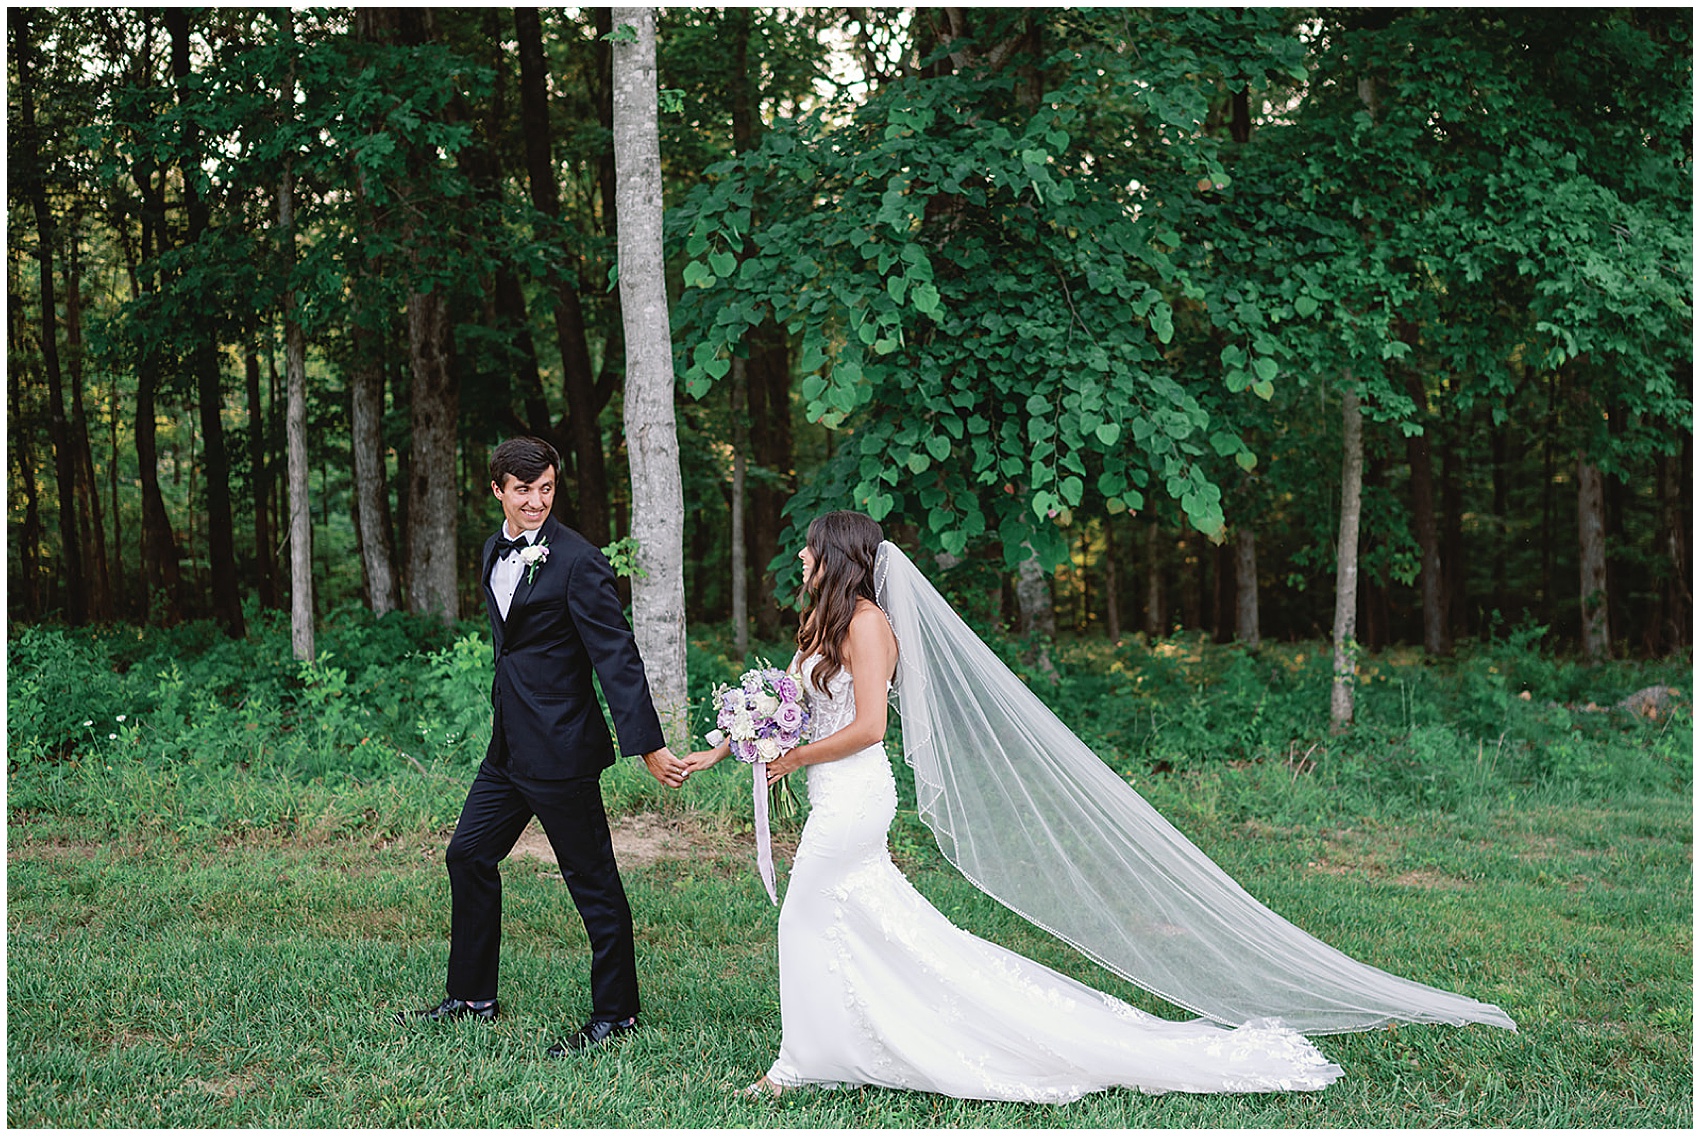 A groom in a black tuxedo leads his bride through a forest trail by the hand at hickory meadow charlotte tn